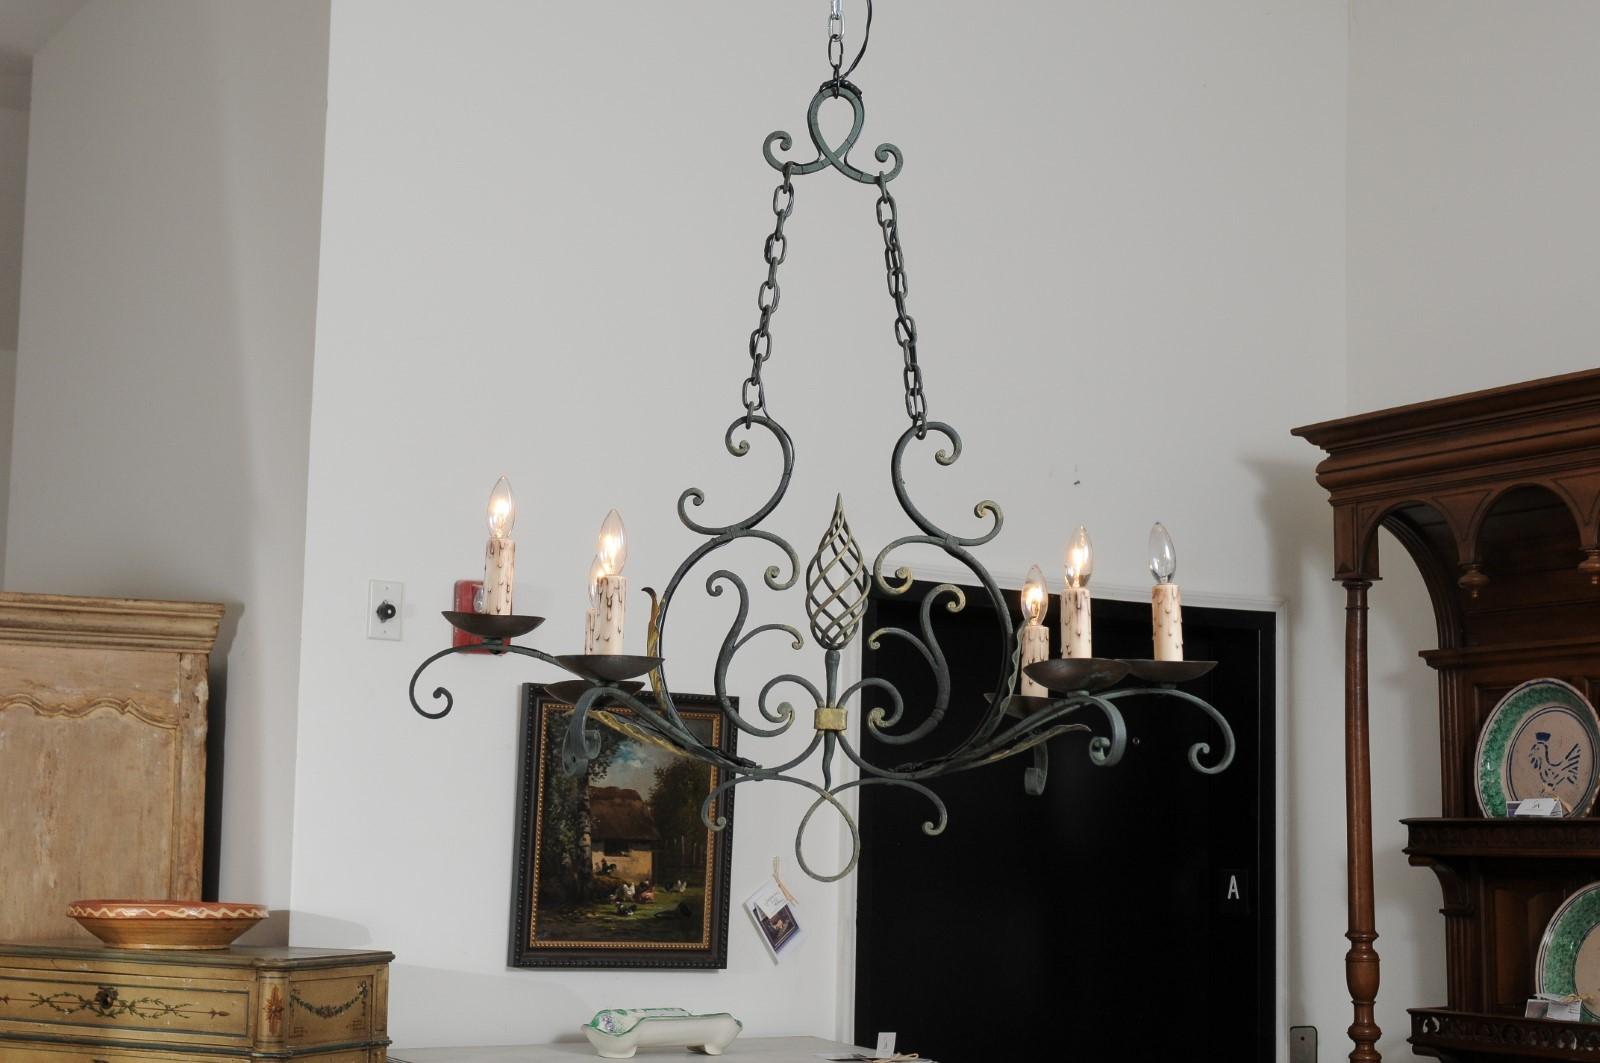 French 19th Century Six-Light Iron Chandelier with Spiral and Scrolling Arms For Sale 5